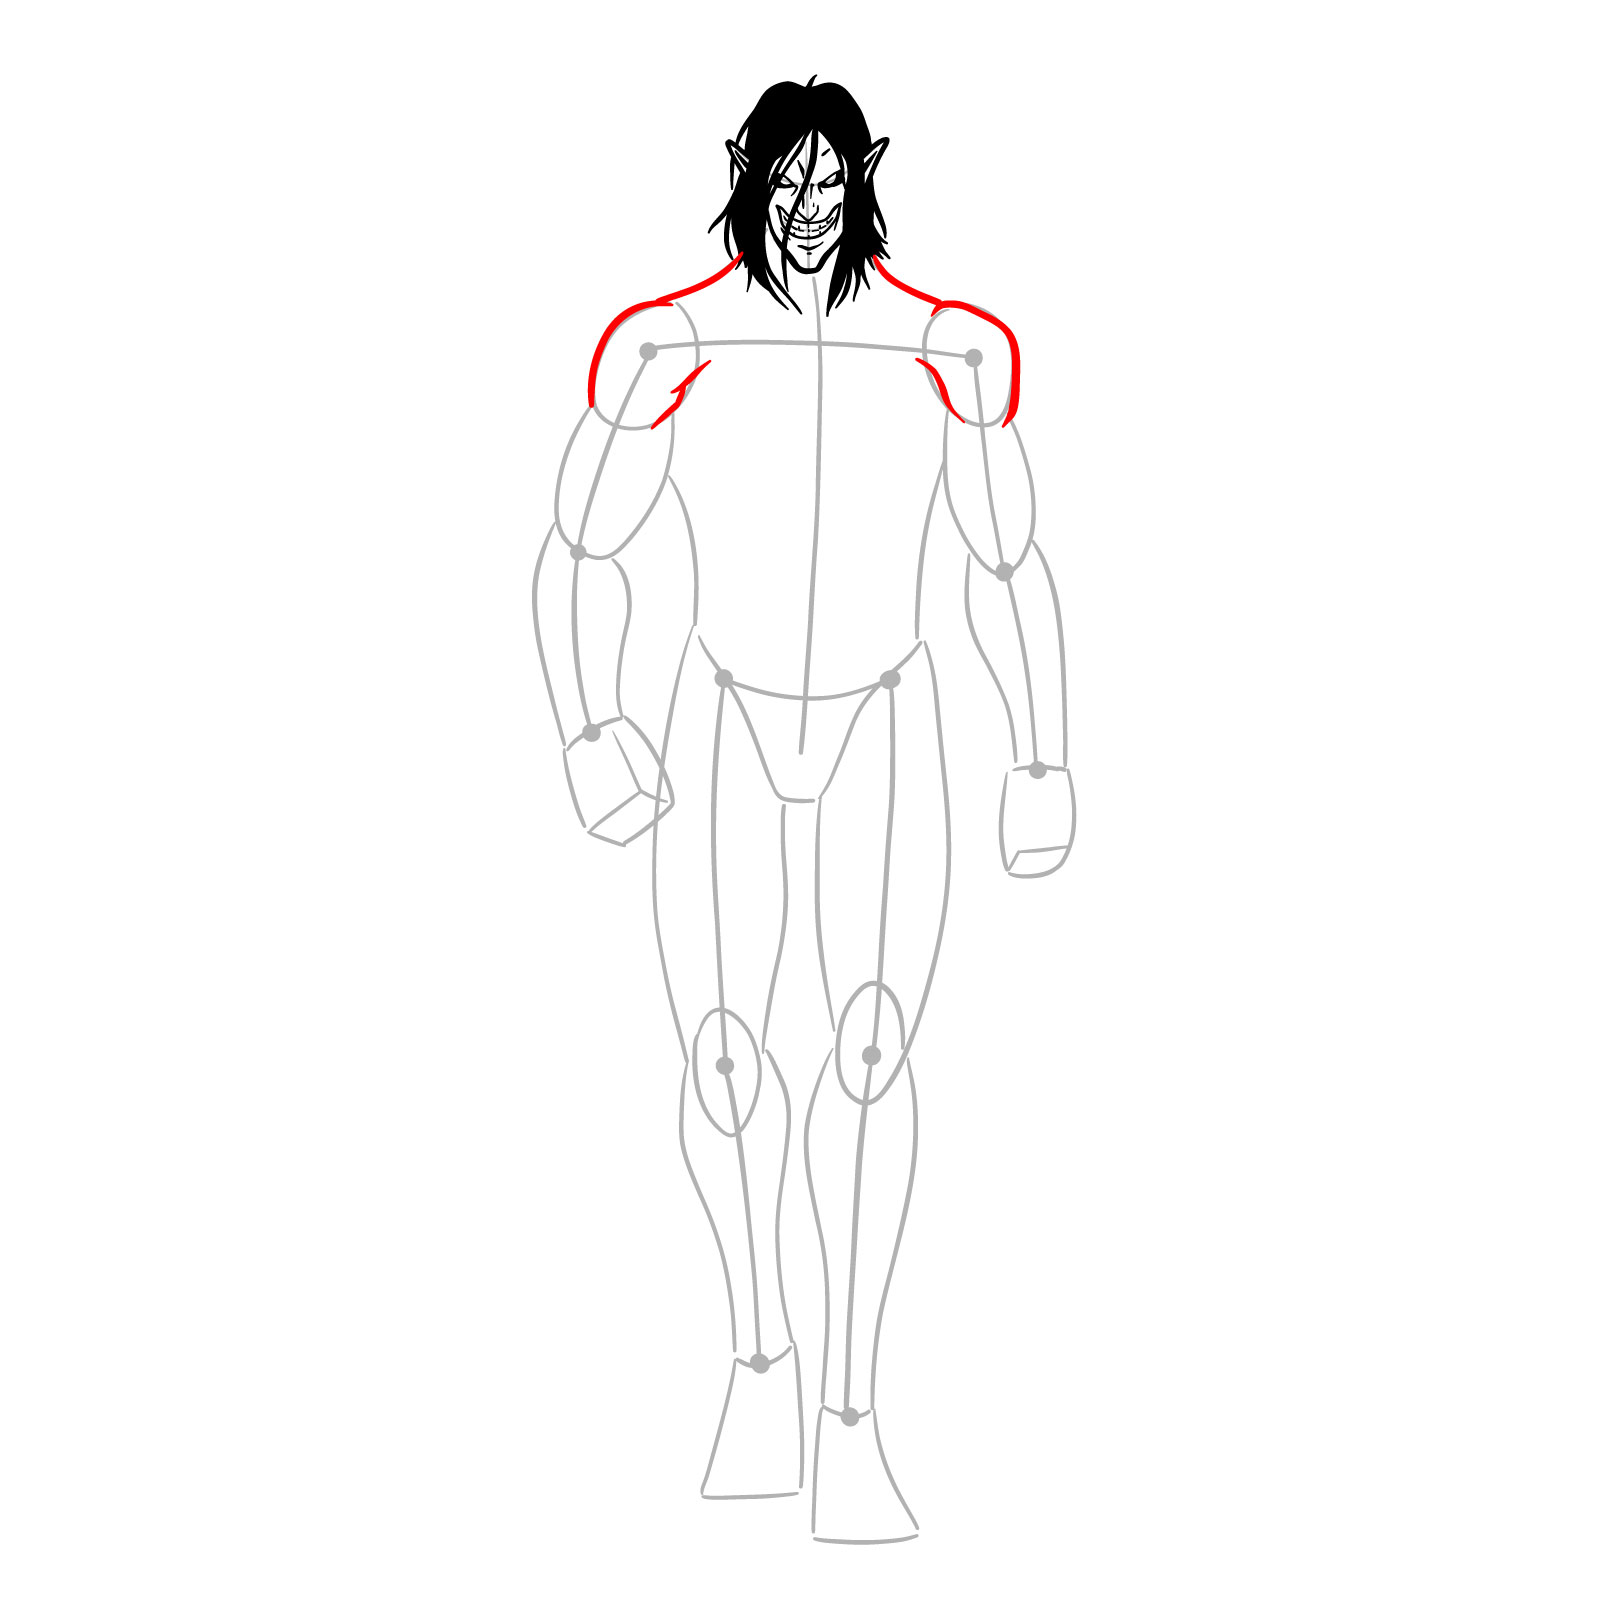 How to draw Eren Jaeger's Titan form full body - step 11